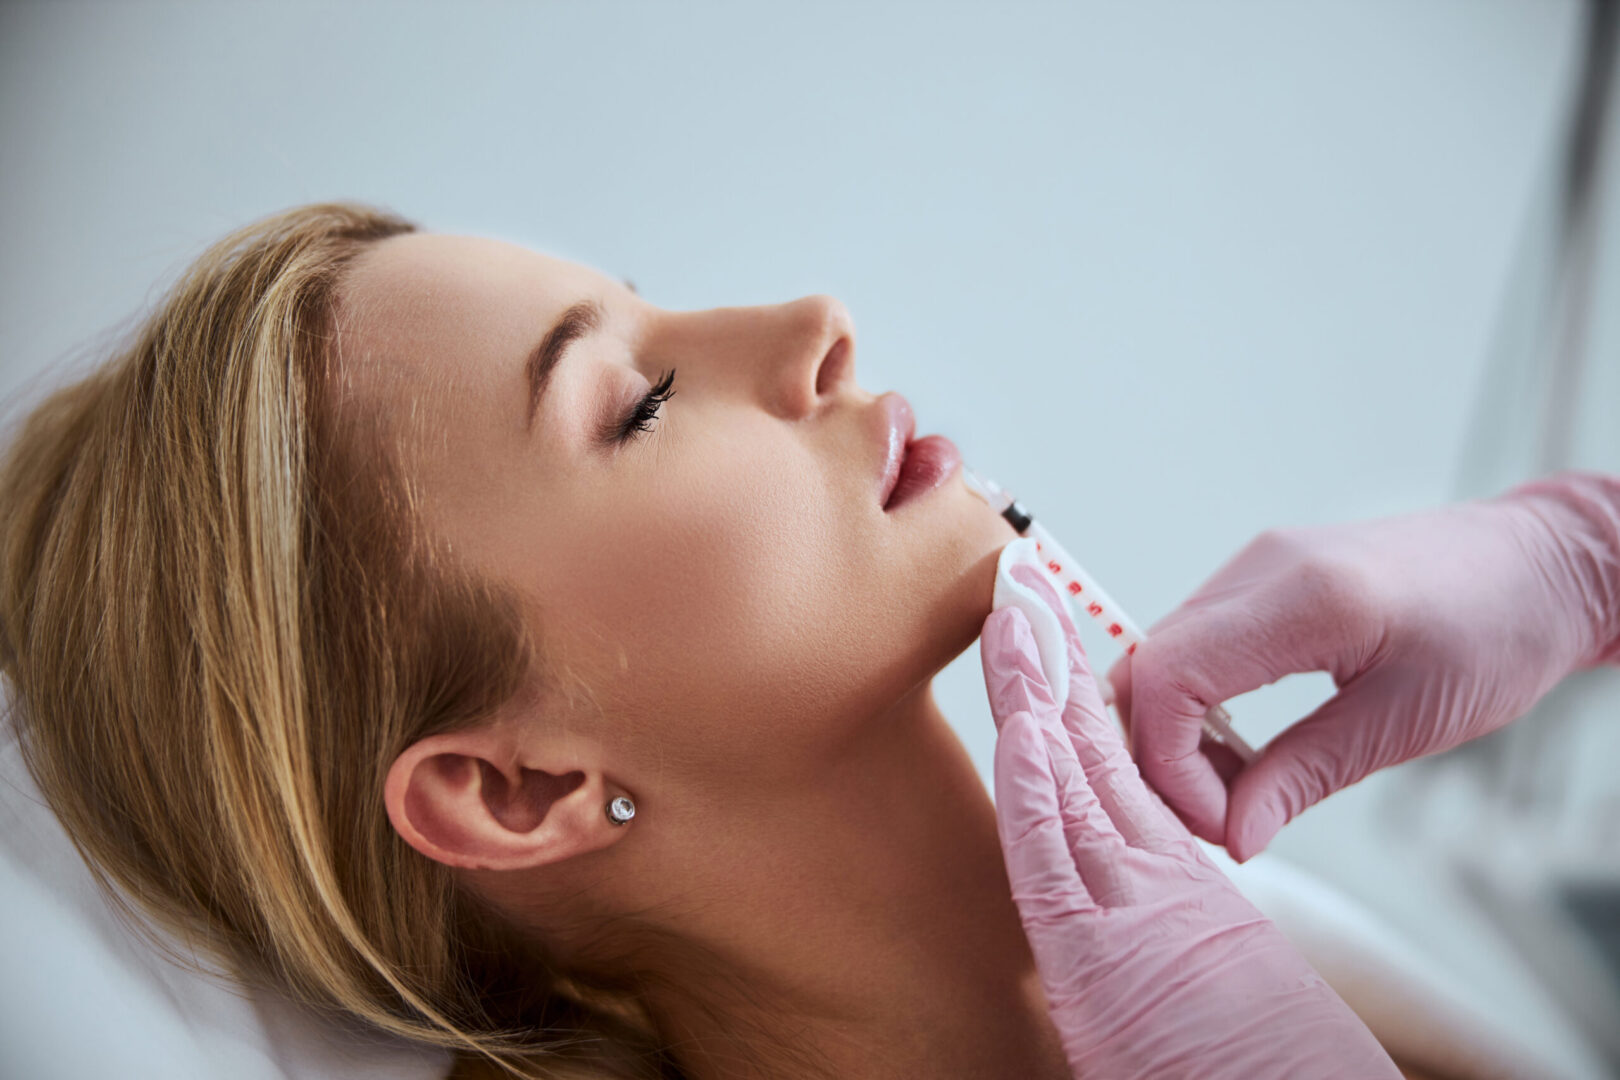 facial filler procedures provided by Aspire Surgical in the Salt Lake City, UT area